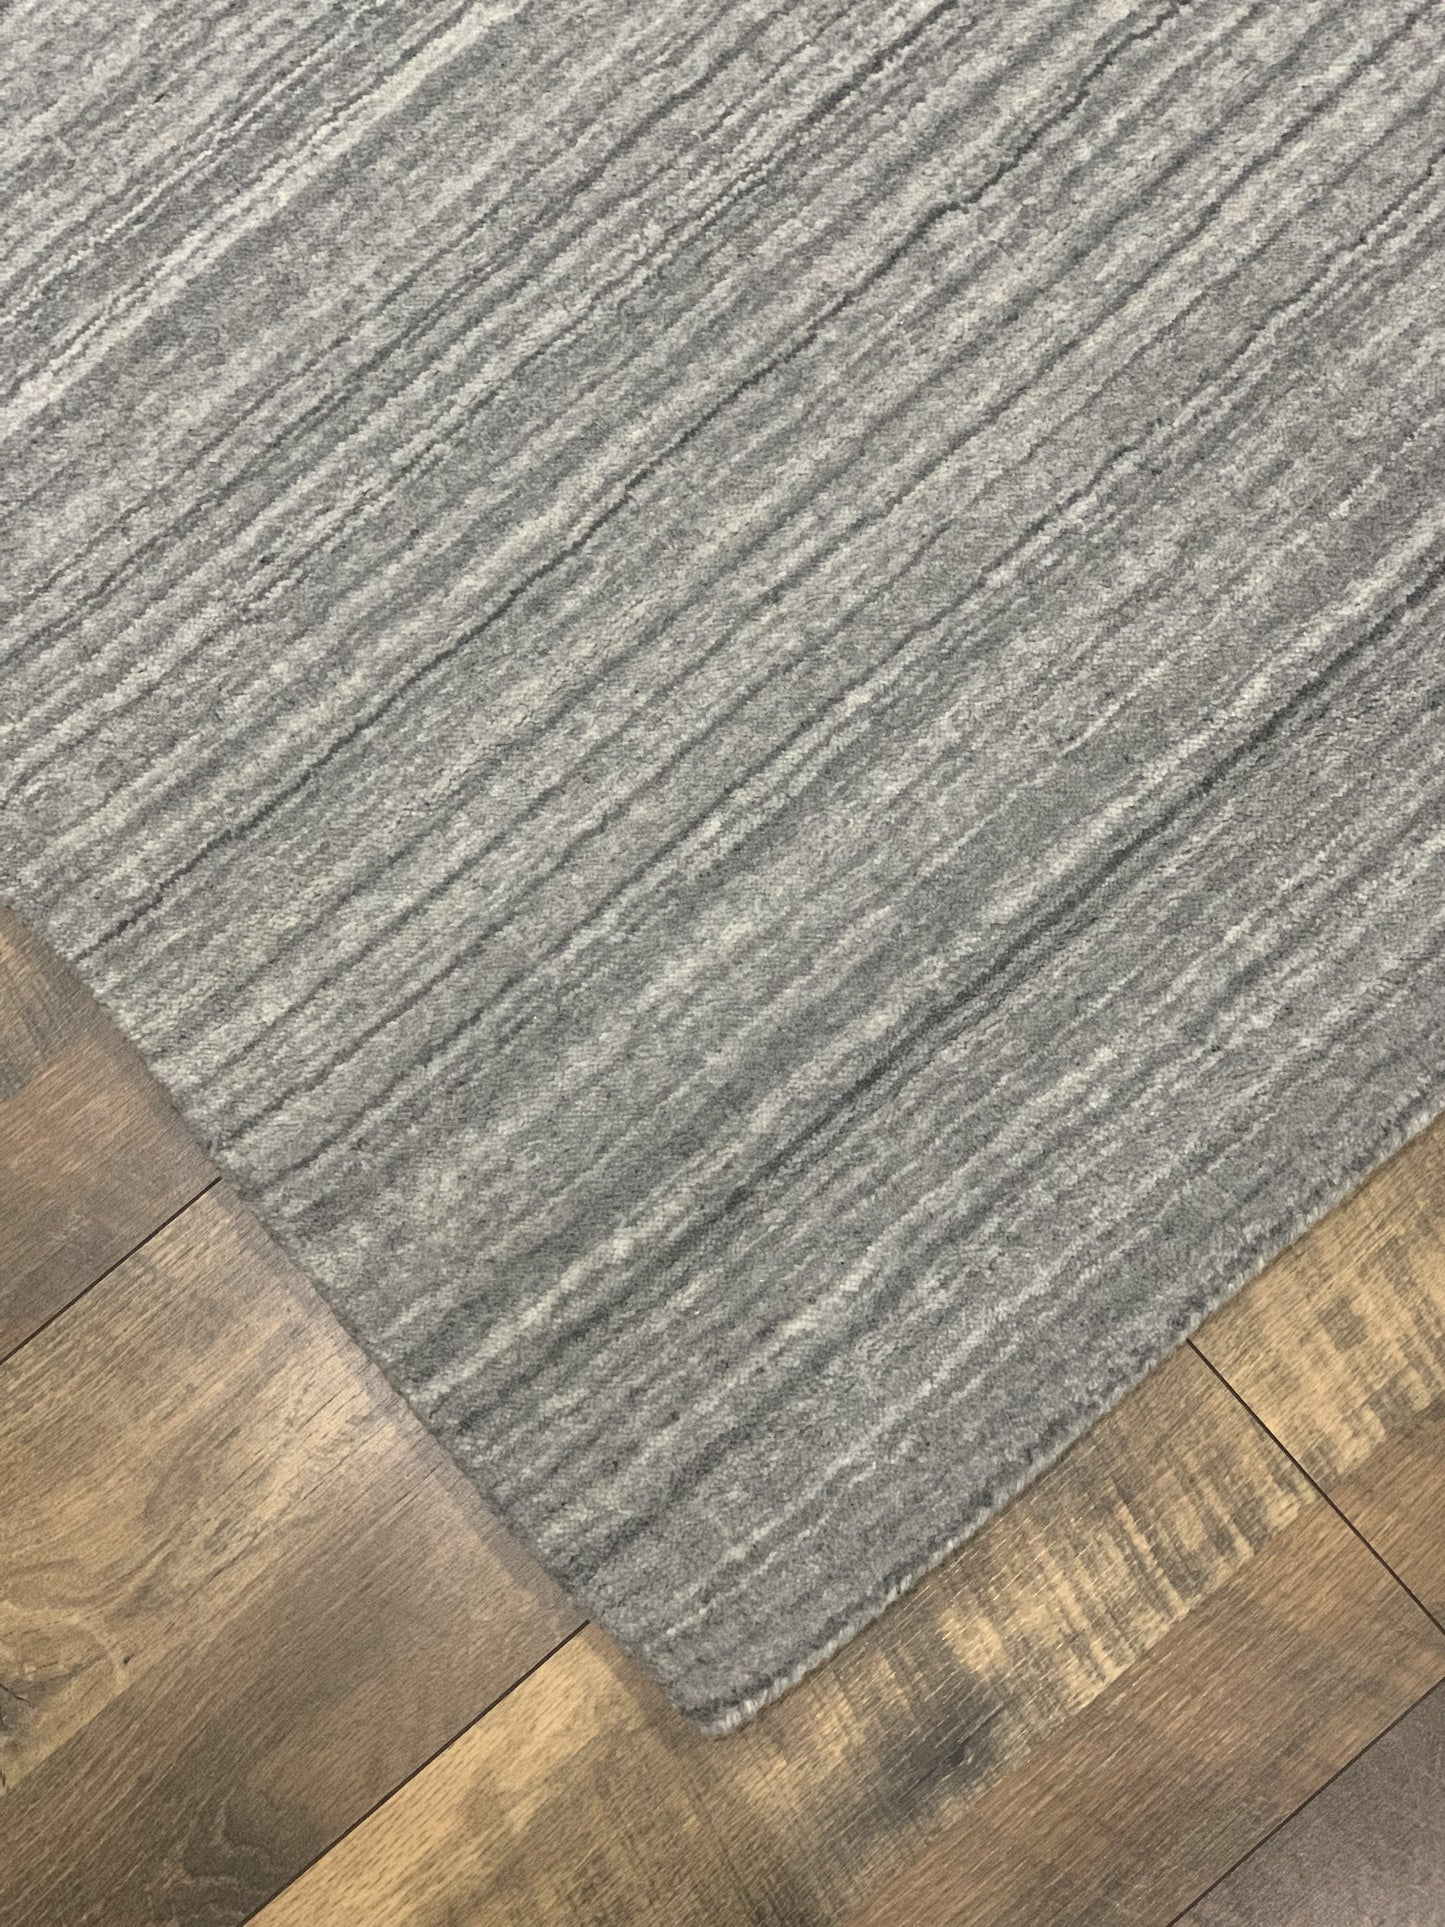 performance rug collection indoor outdoor stain resistant wool polysilk rug good for pets good for kids stone gray solid color carpet rug area rug store affordable online rug store orange county california refined carpet rugs